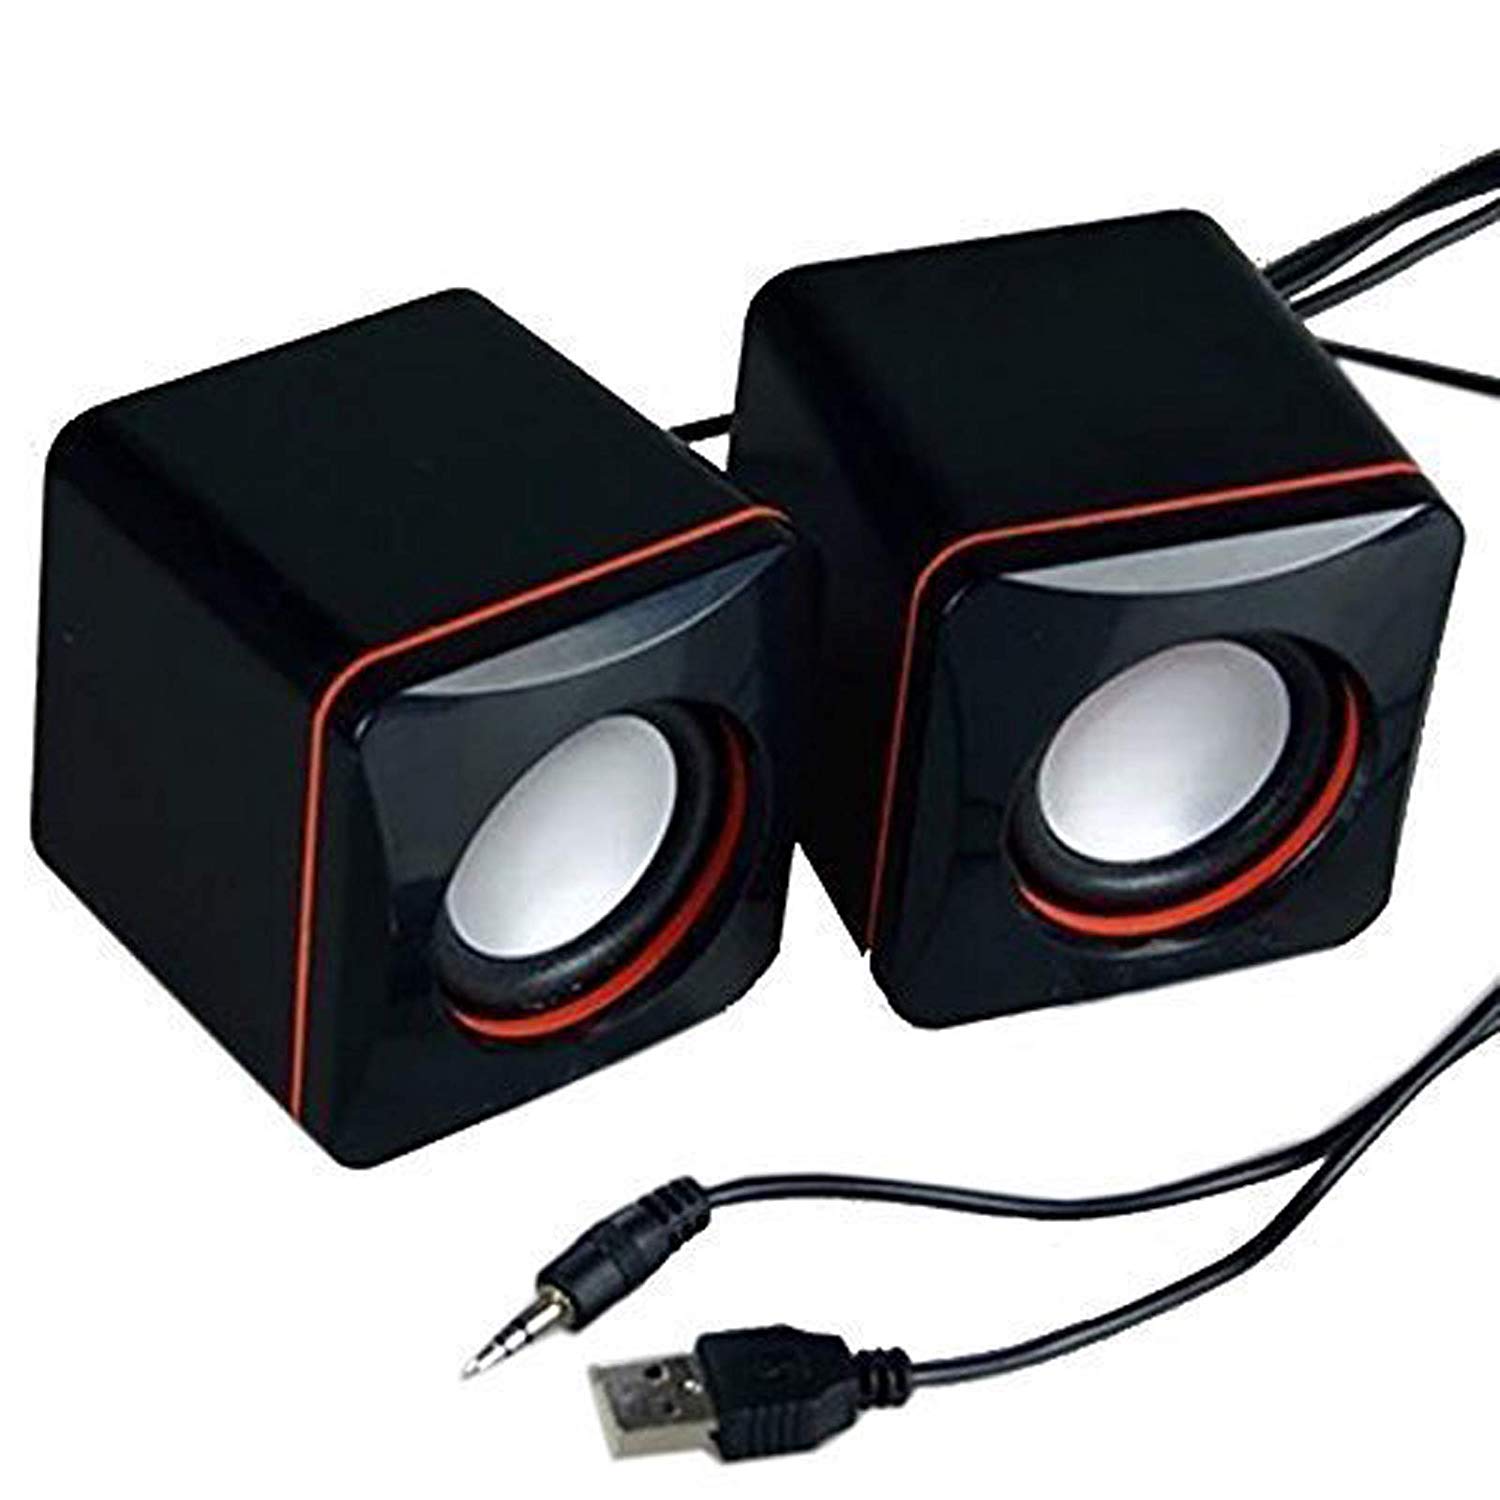 Portable Computer Speakers USB Powered Desktop Mini Speaker Bass Sound Music Player System Wired Small Speaker - image 1 of 7